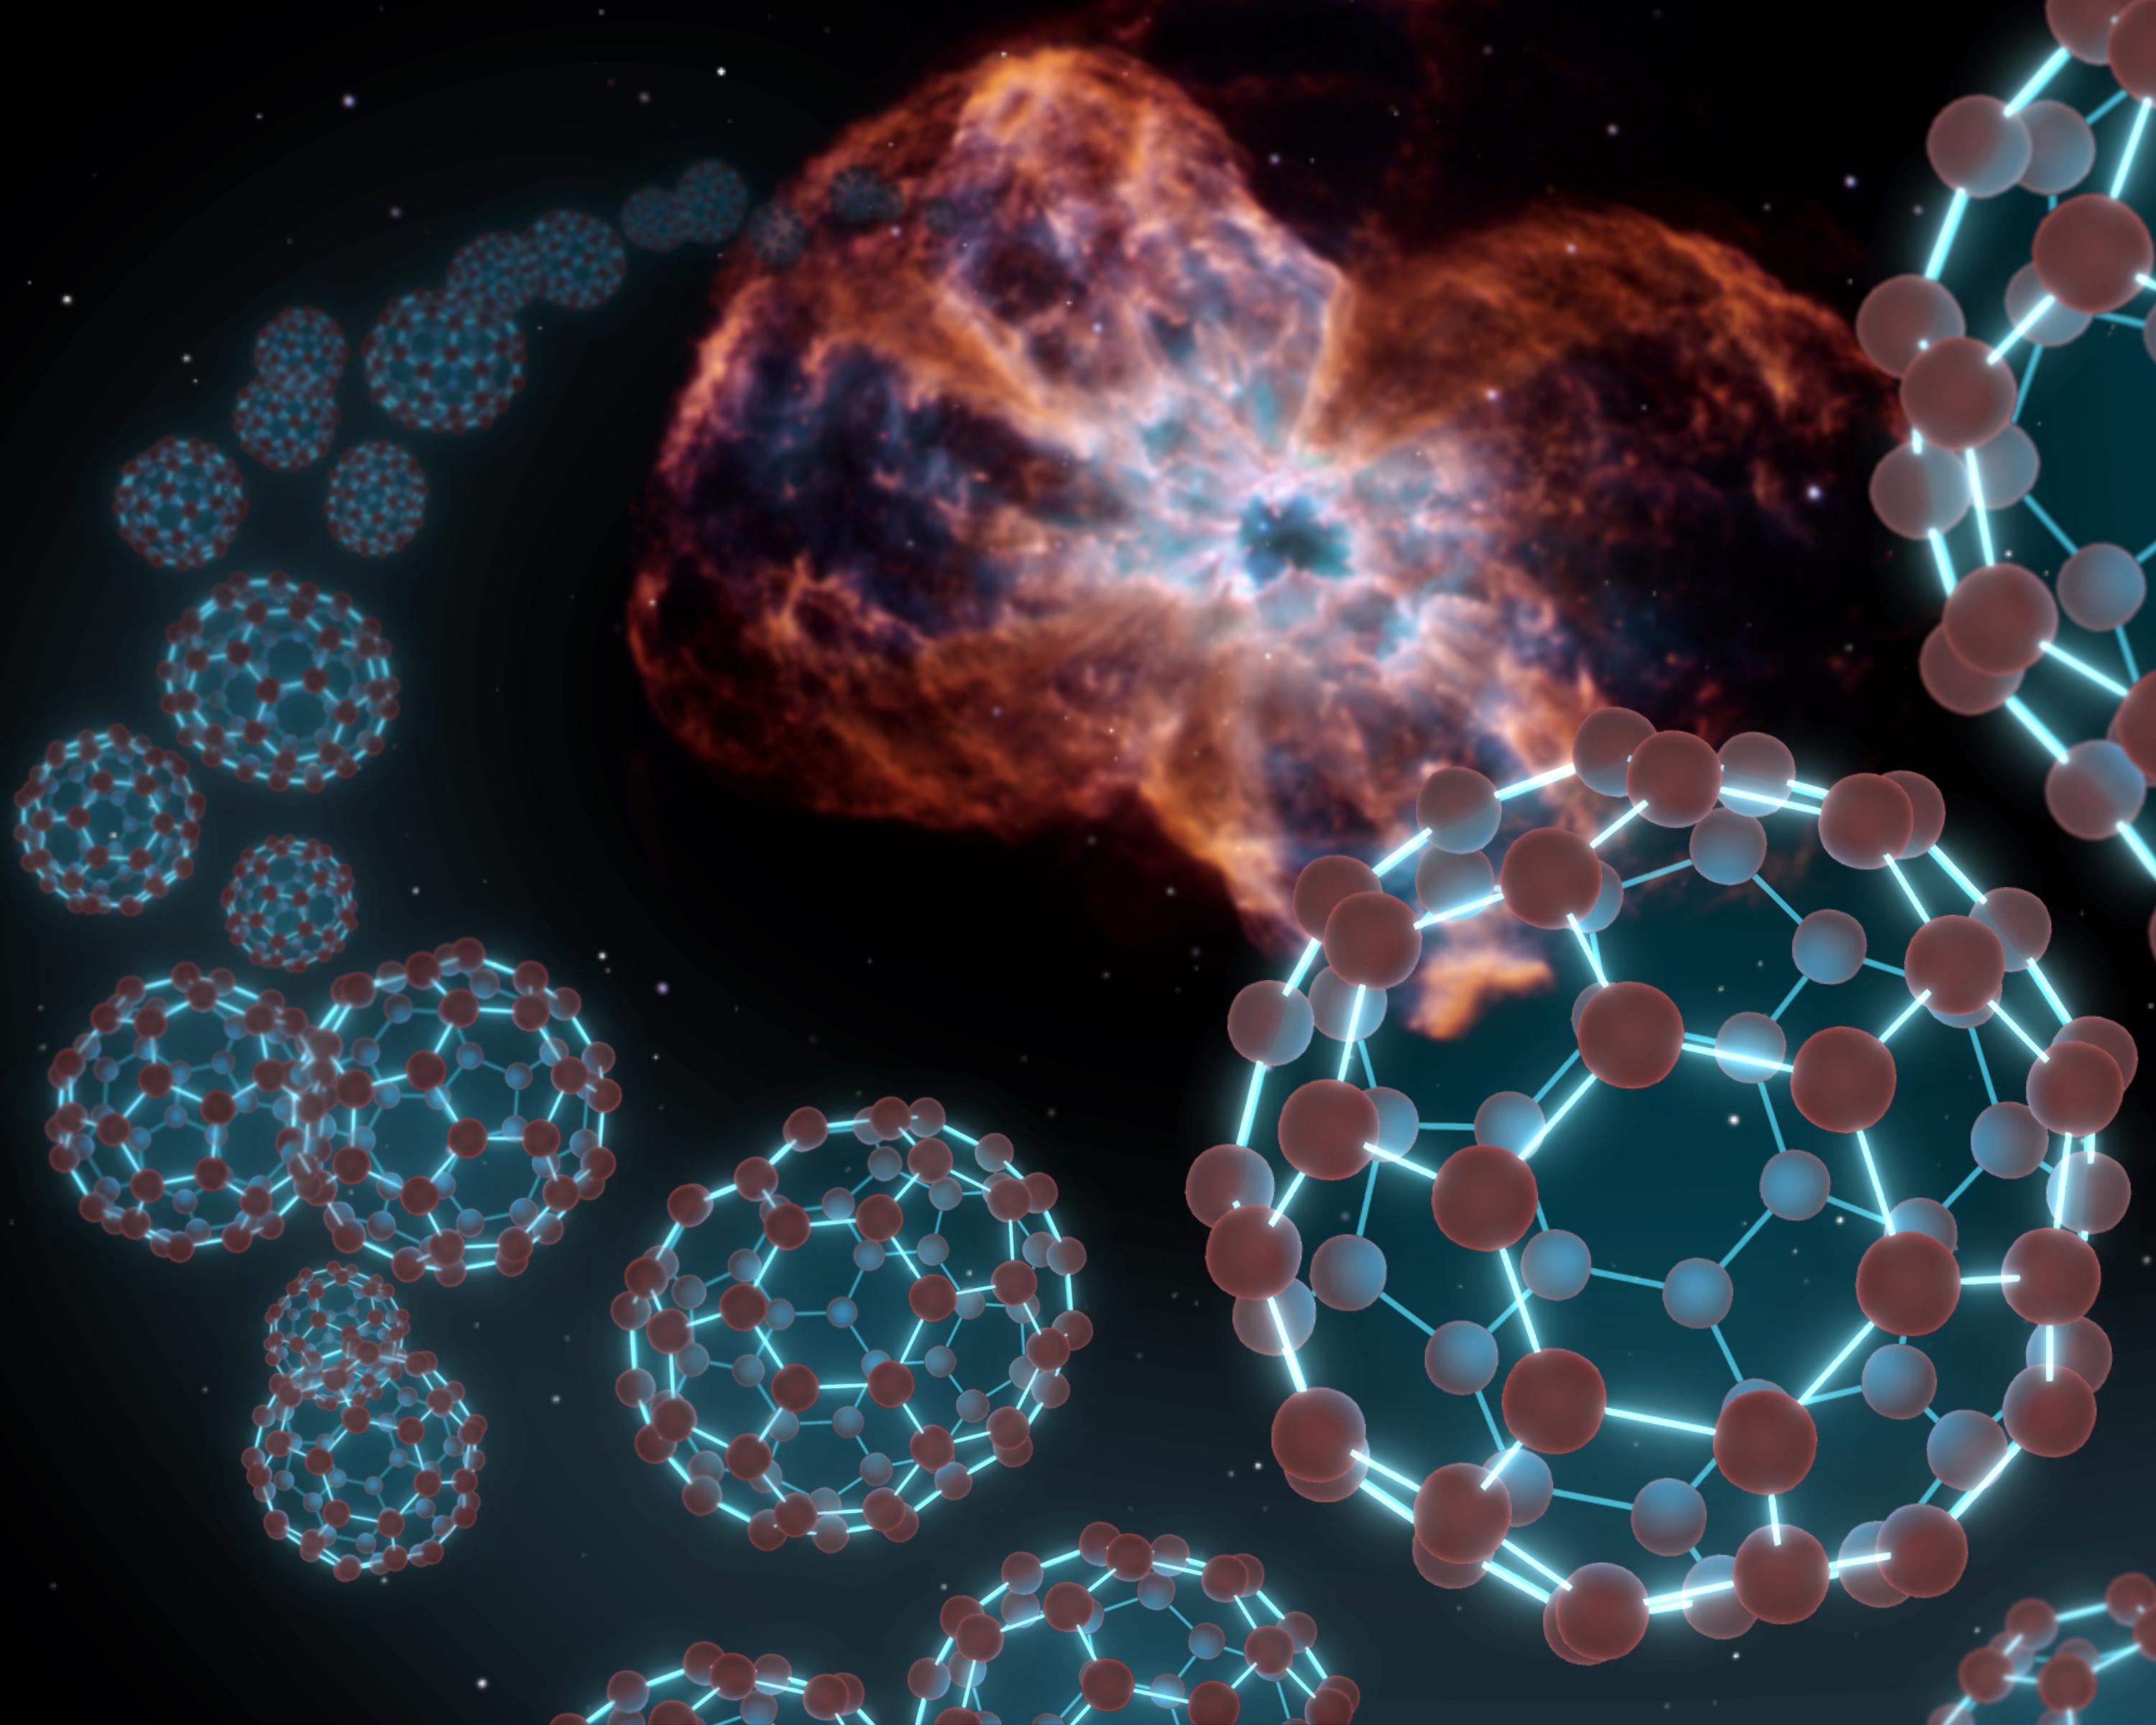 An artist's conception showing spherical carbon molecules known as buckyballs coming out from a planetary nebula — material shed by a dying star. Researchers at the University of Arizona have now created these molecules under laboratory conditions thought to mimic those in their "natural" habitat in space. (Image: NASA/JPL-Caltech)